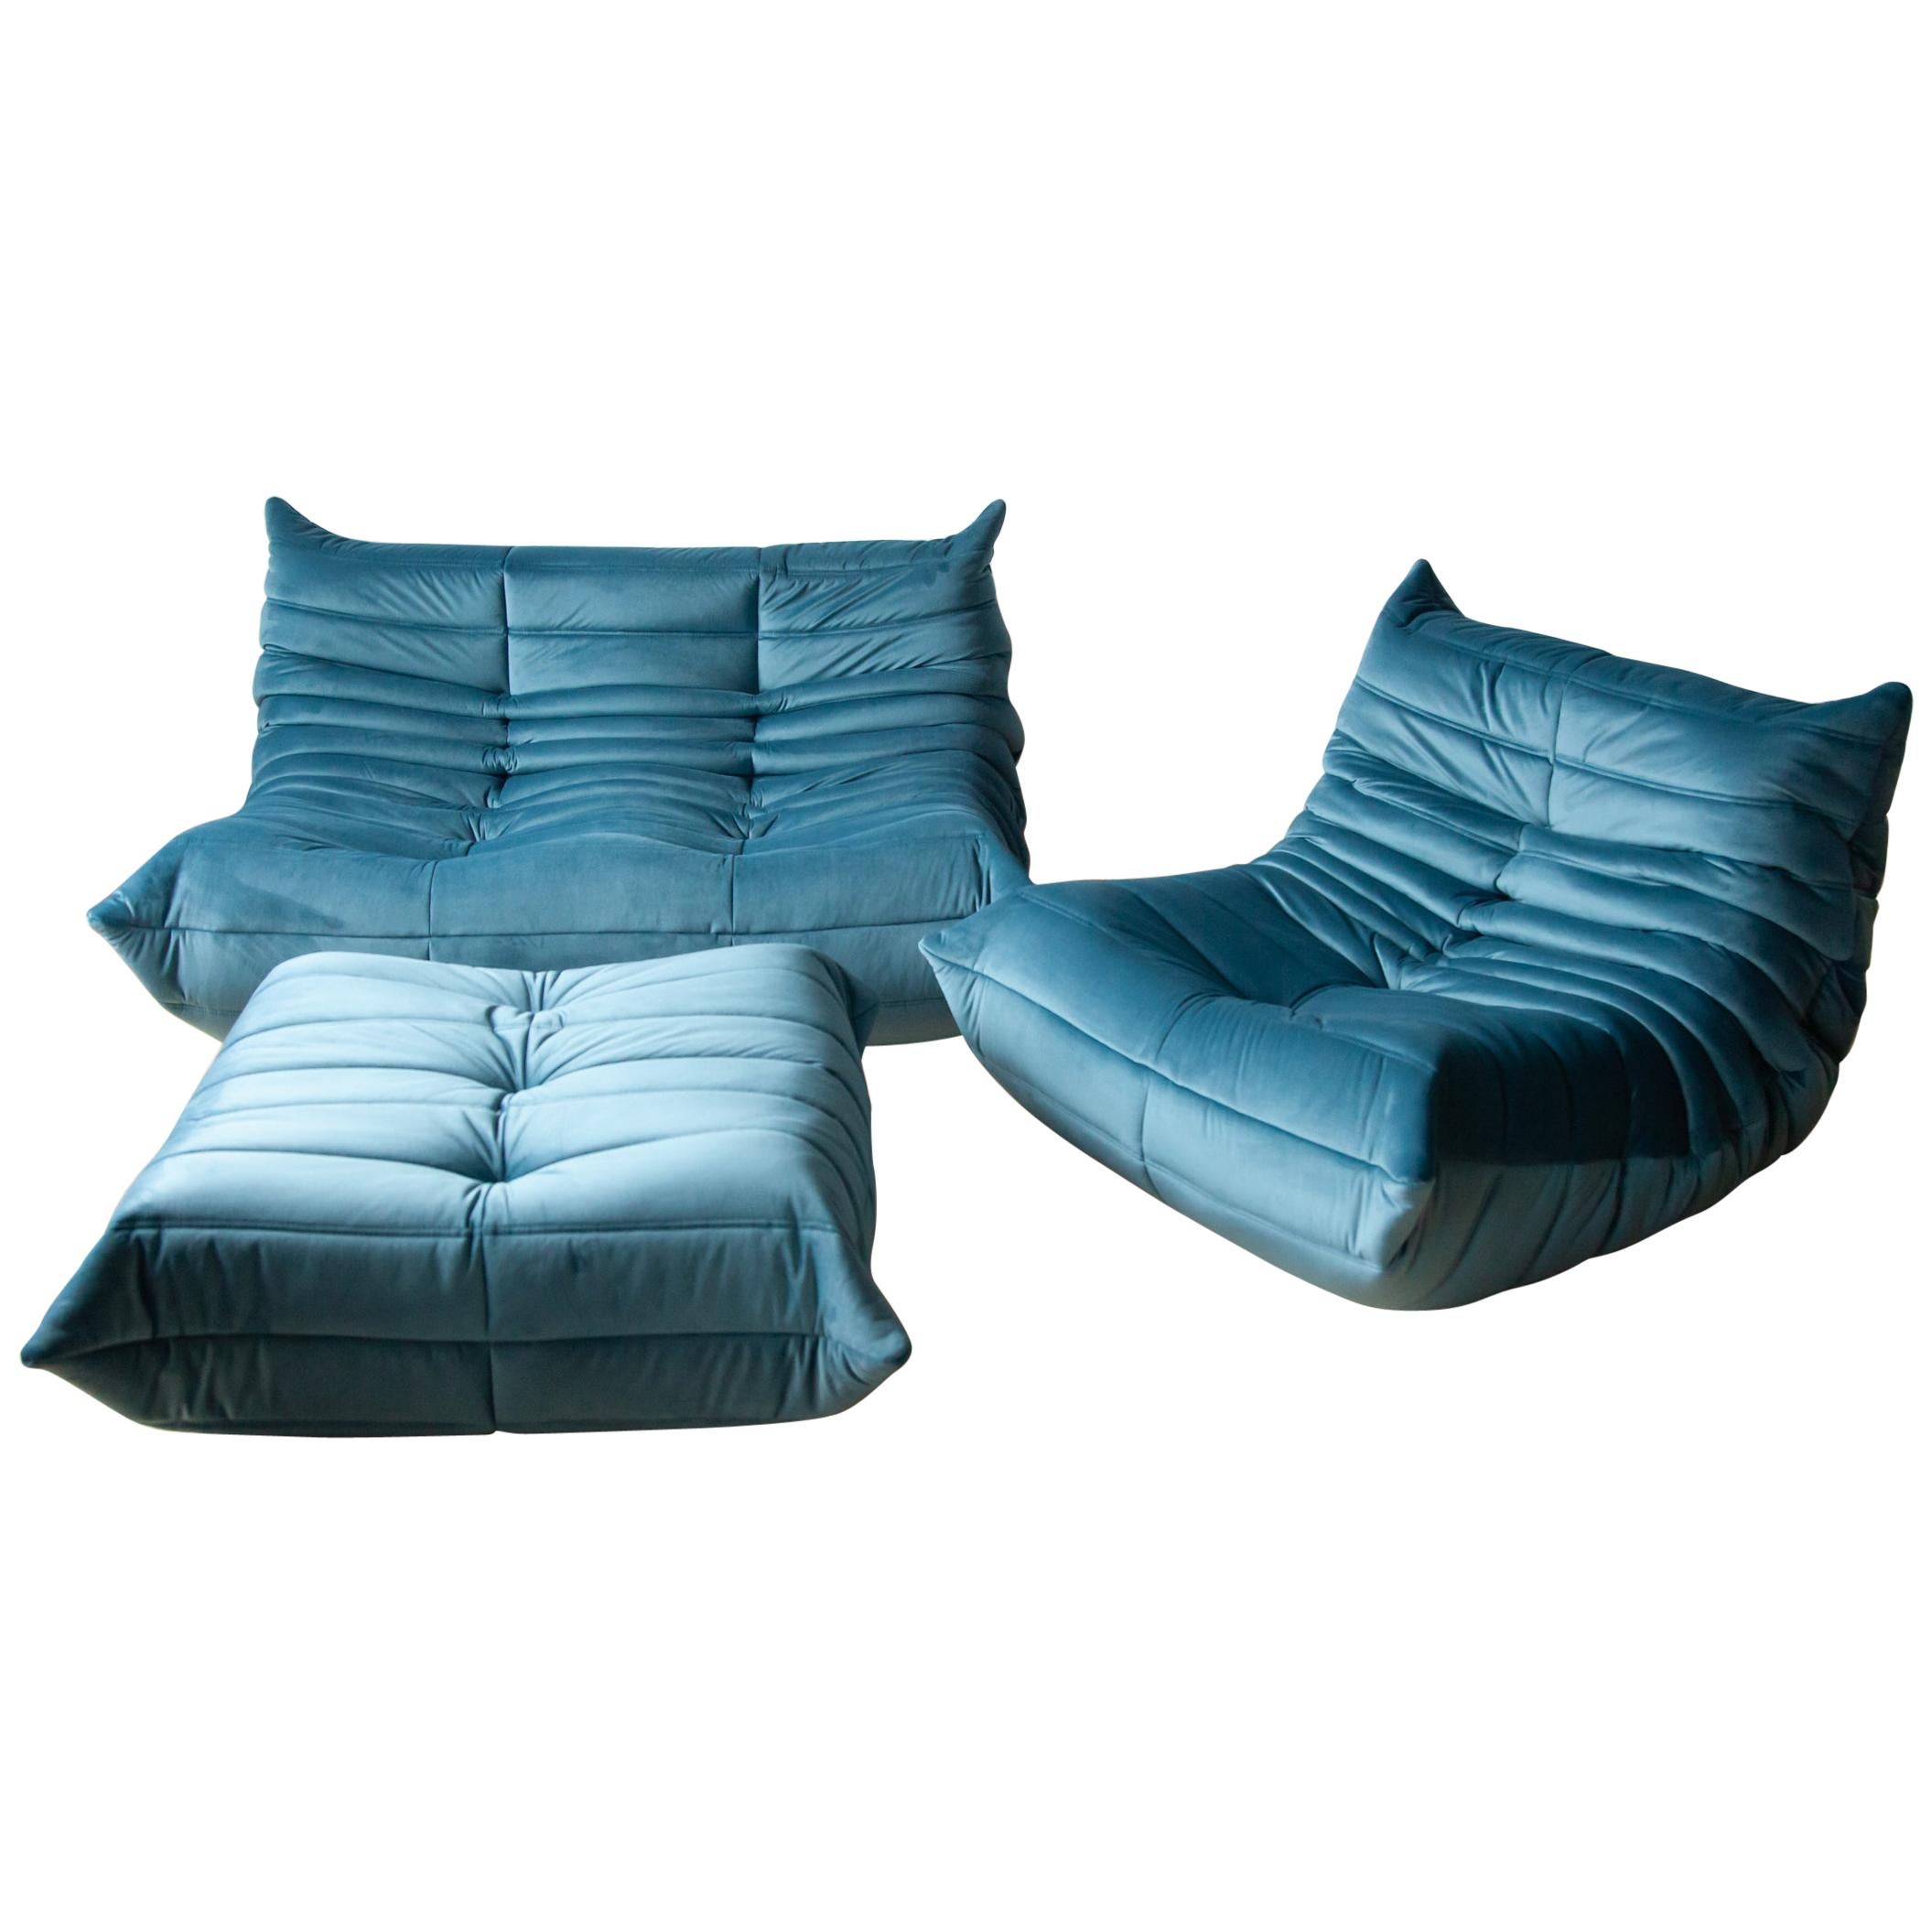 Three-Piece Togo Set by Michel Ducaroy Manufactured by Ligne Roset in France For Sale